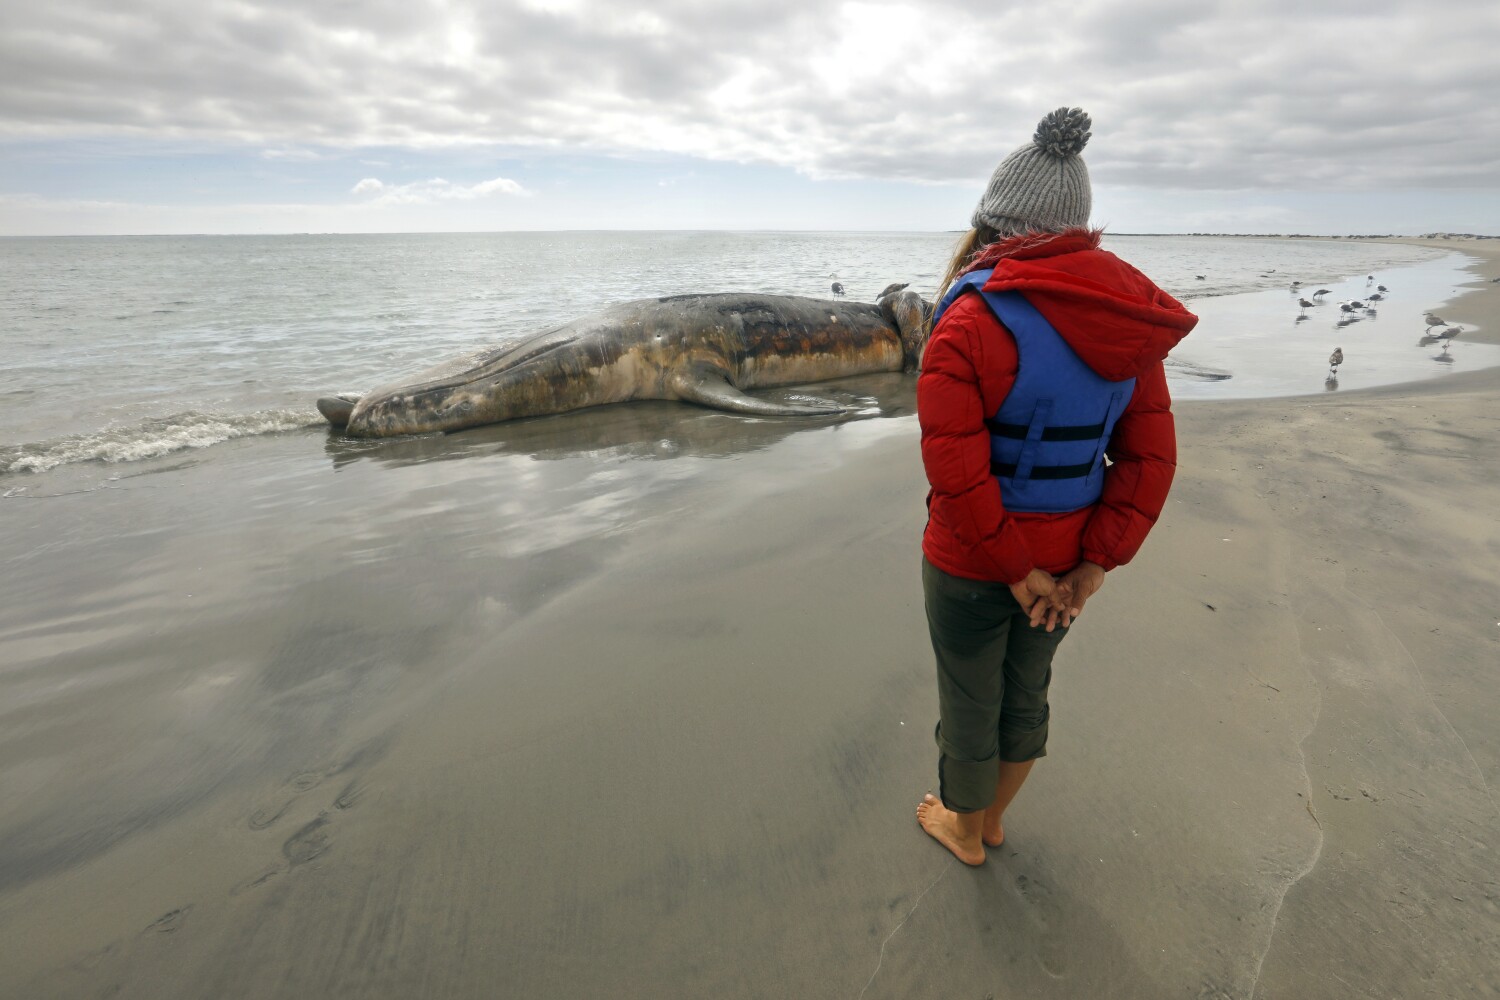 Podcast: The mystery of the disappearing gray whales